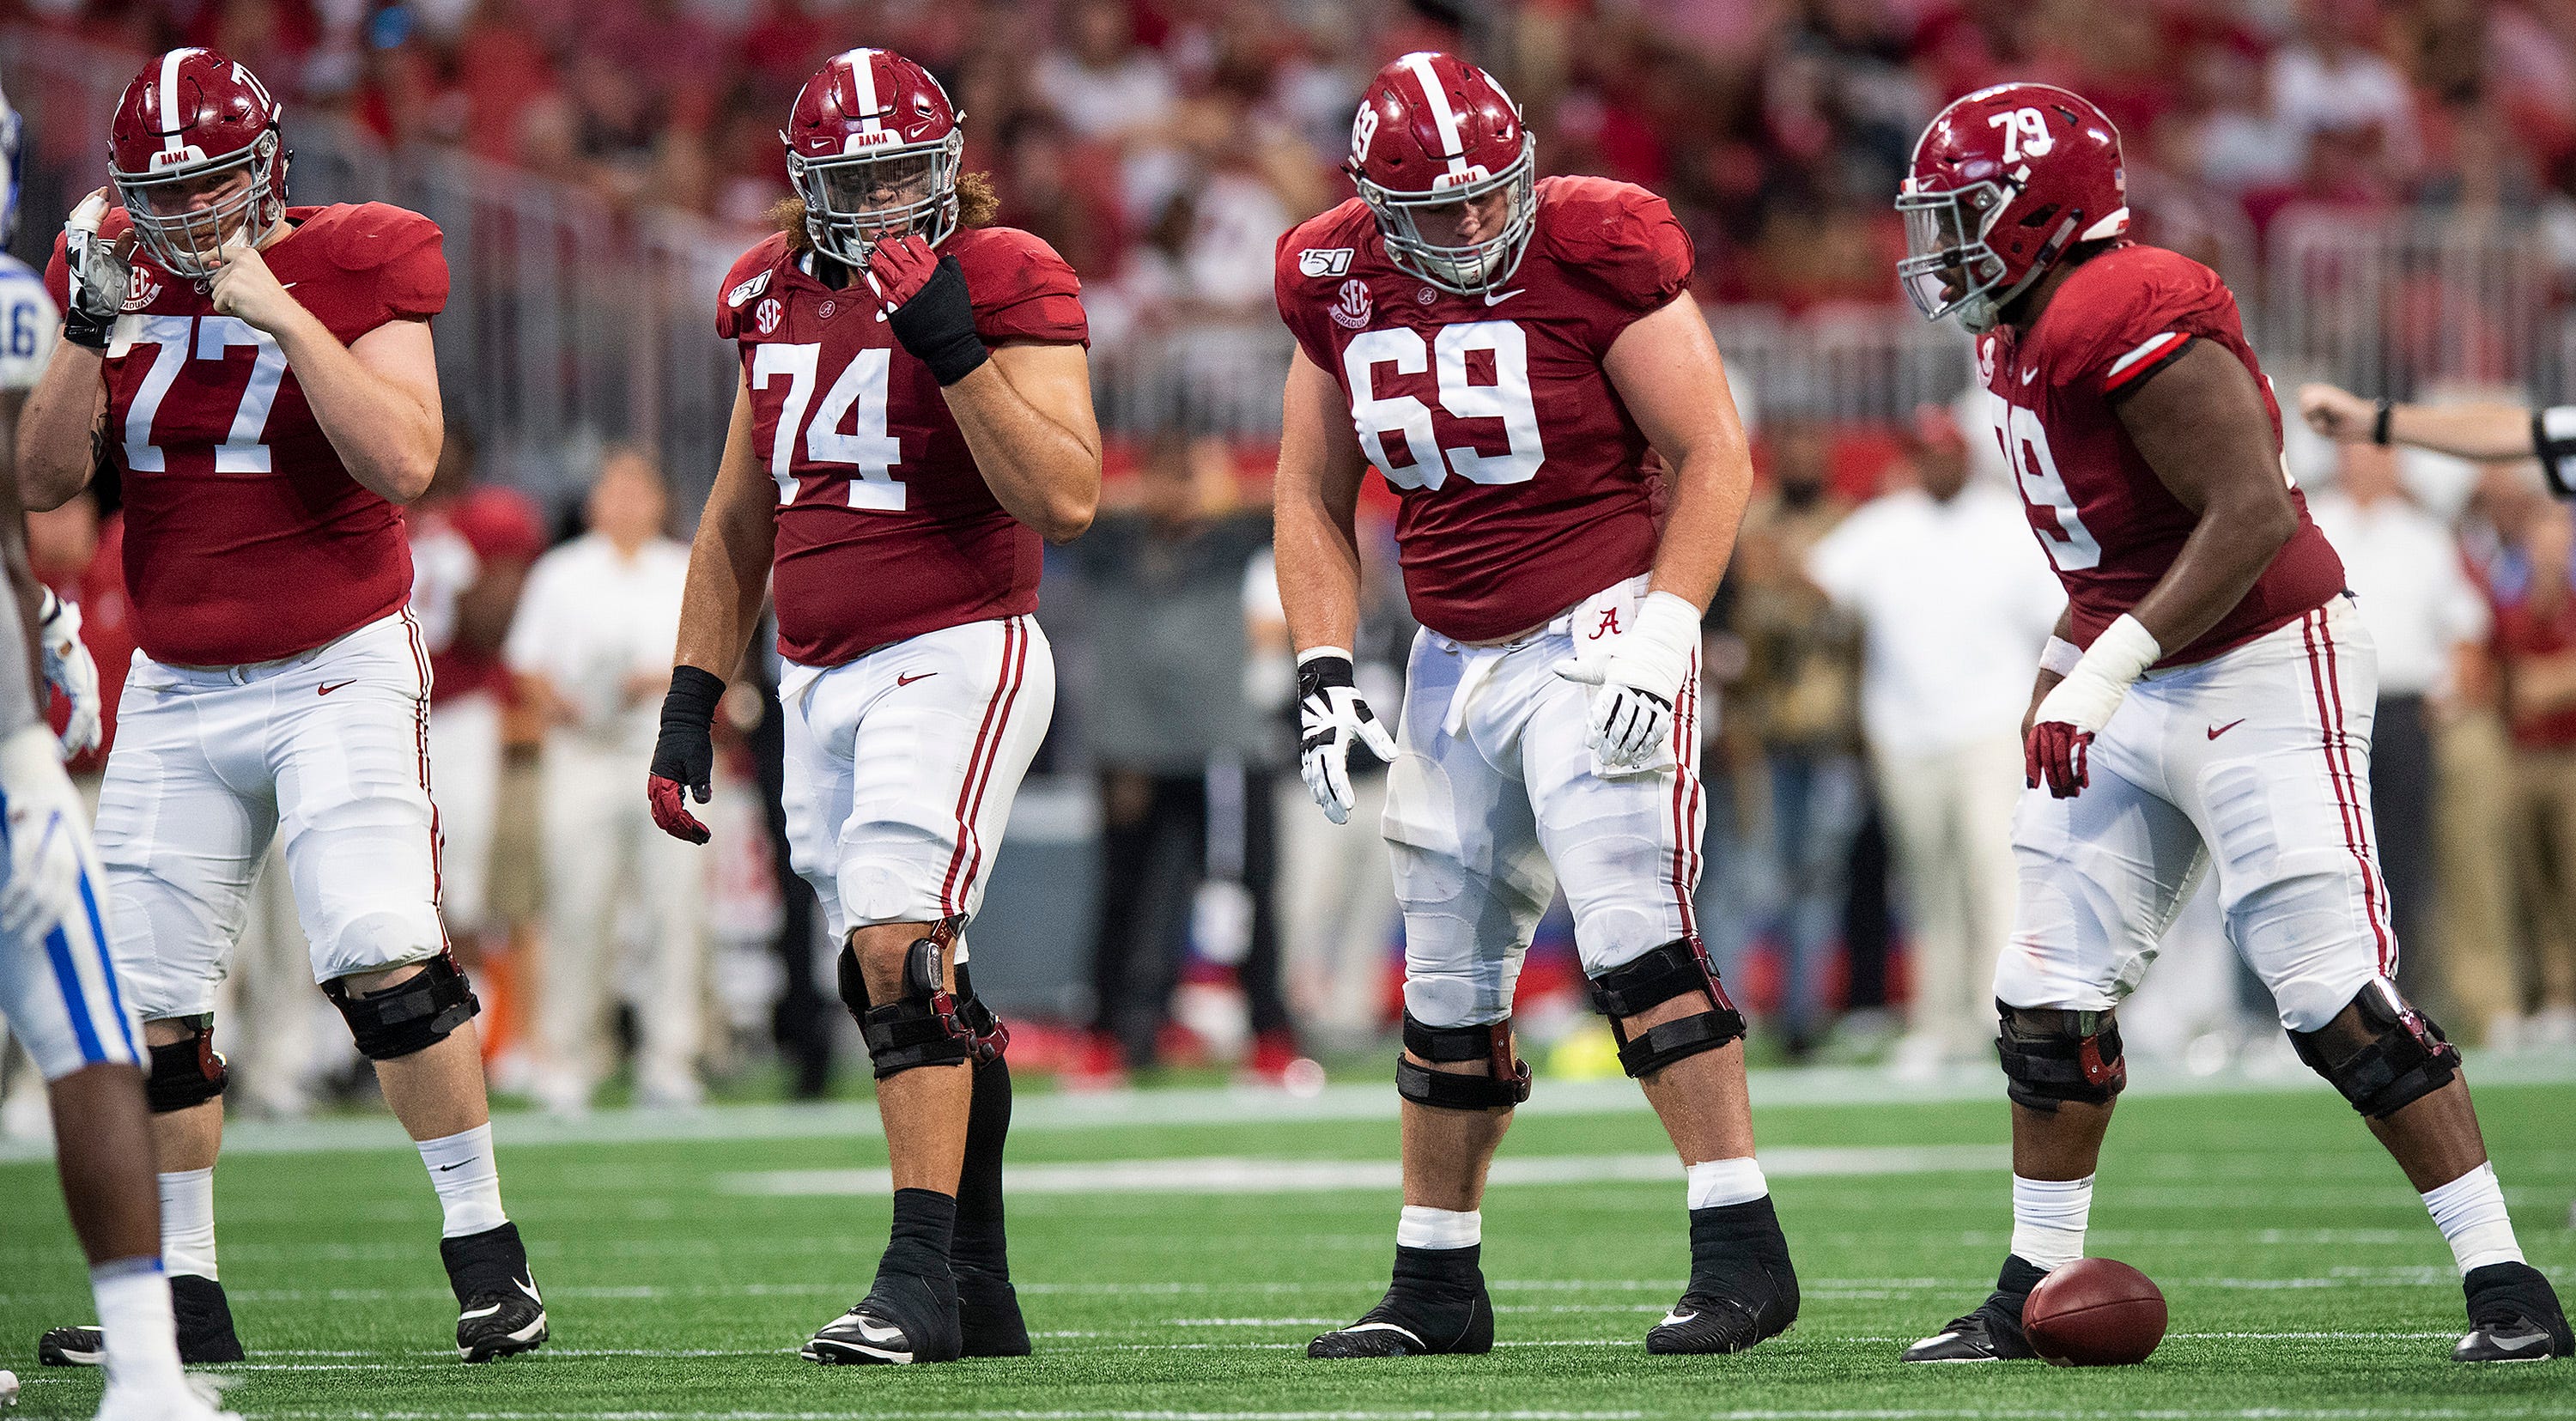 Alabama offensive linemen Matt Womack (77), Jedrick Wills, Jr., (74), Landon Dickerson (69) and Chris Owens (79) line up against Duke in the Chick-fil-A Kickoff Game at Mercedes Benz Stadium in Atlanta, Ga., on Saturday August 31, 2019.